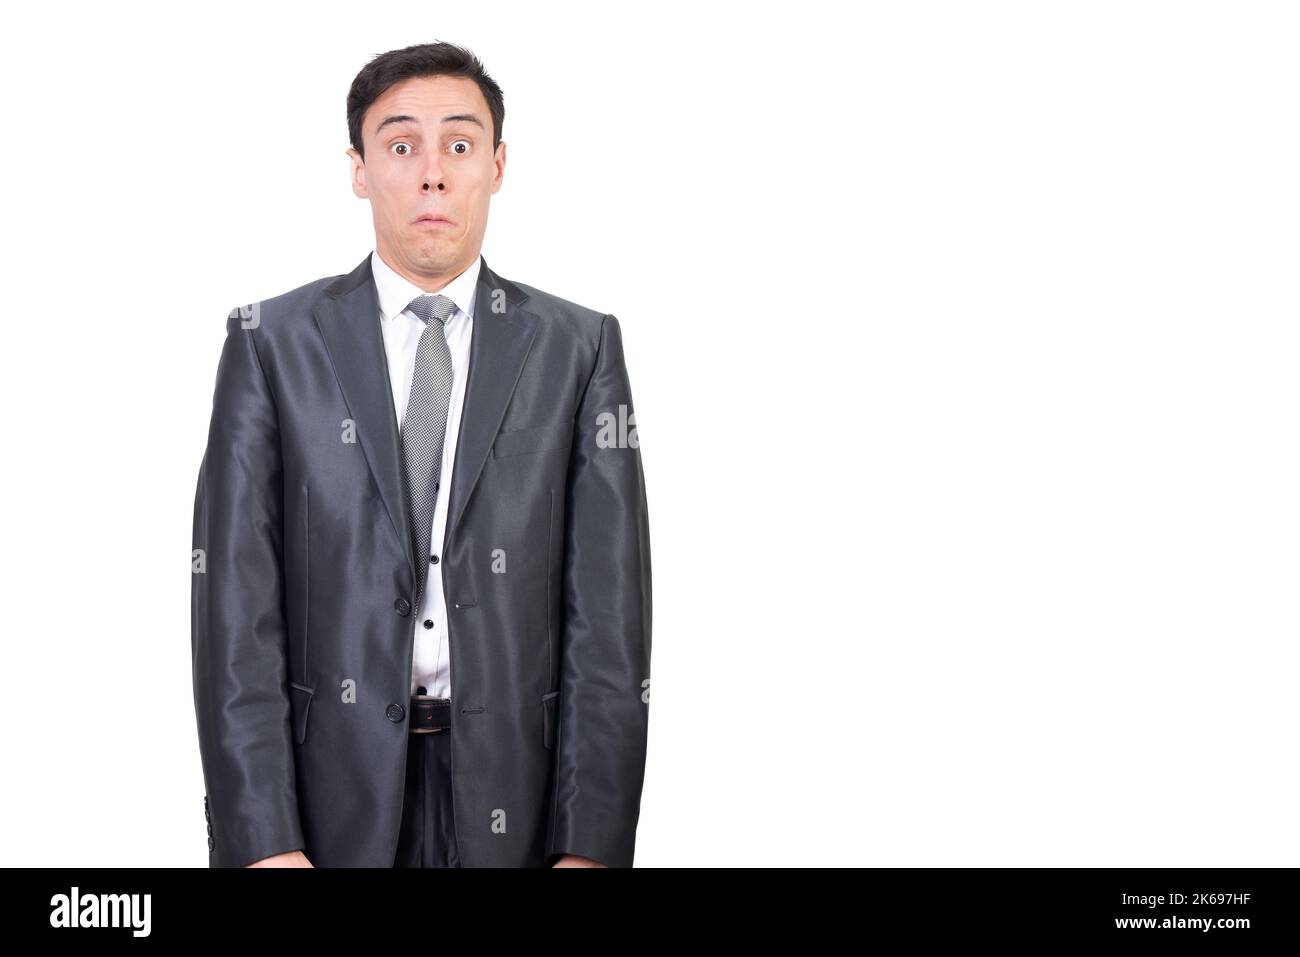 Shocked man in suit looking at camera Stock Photo